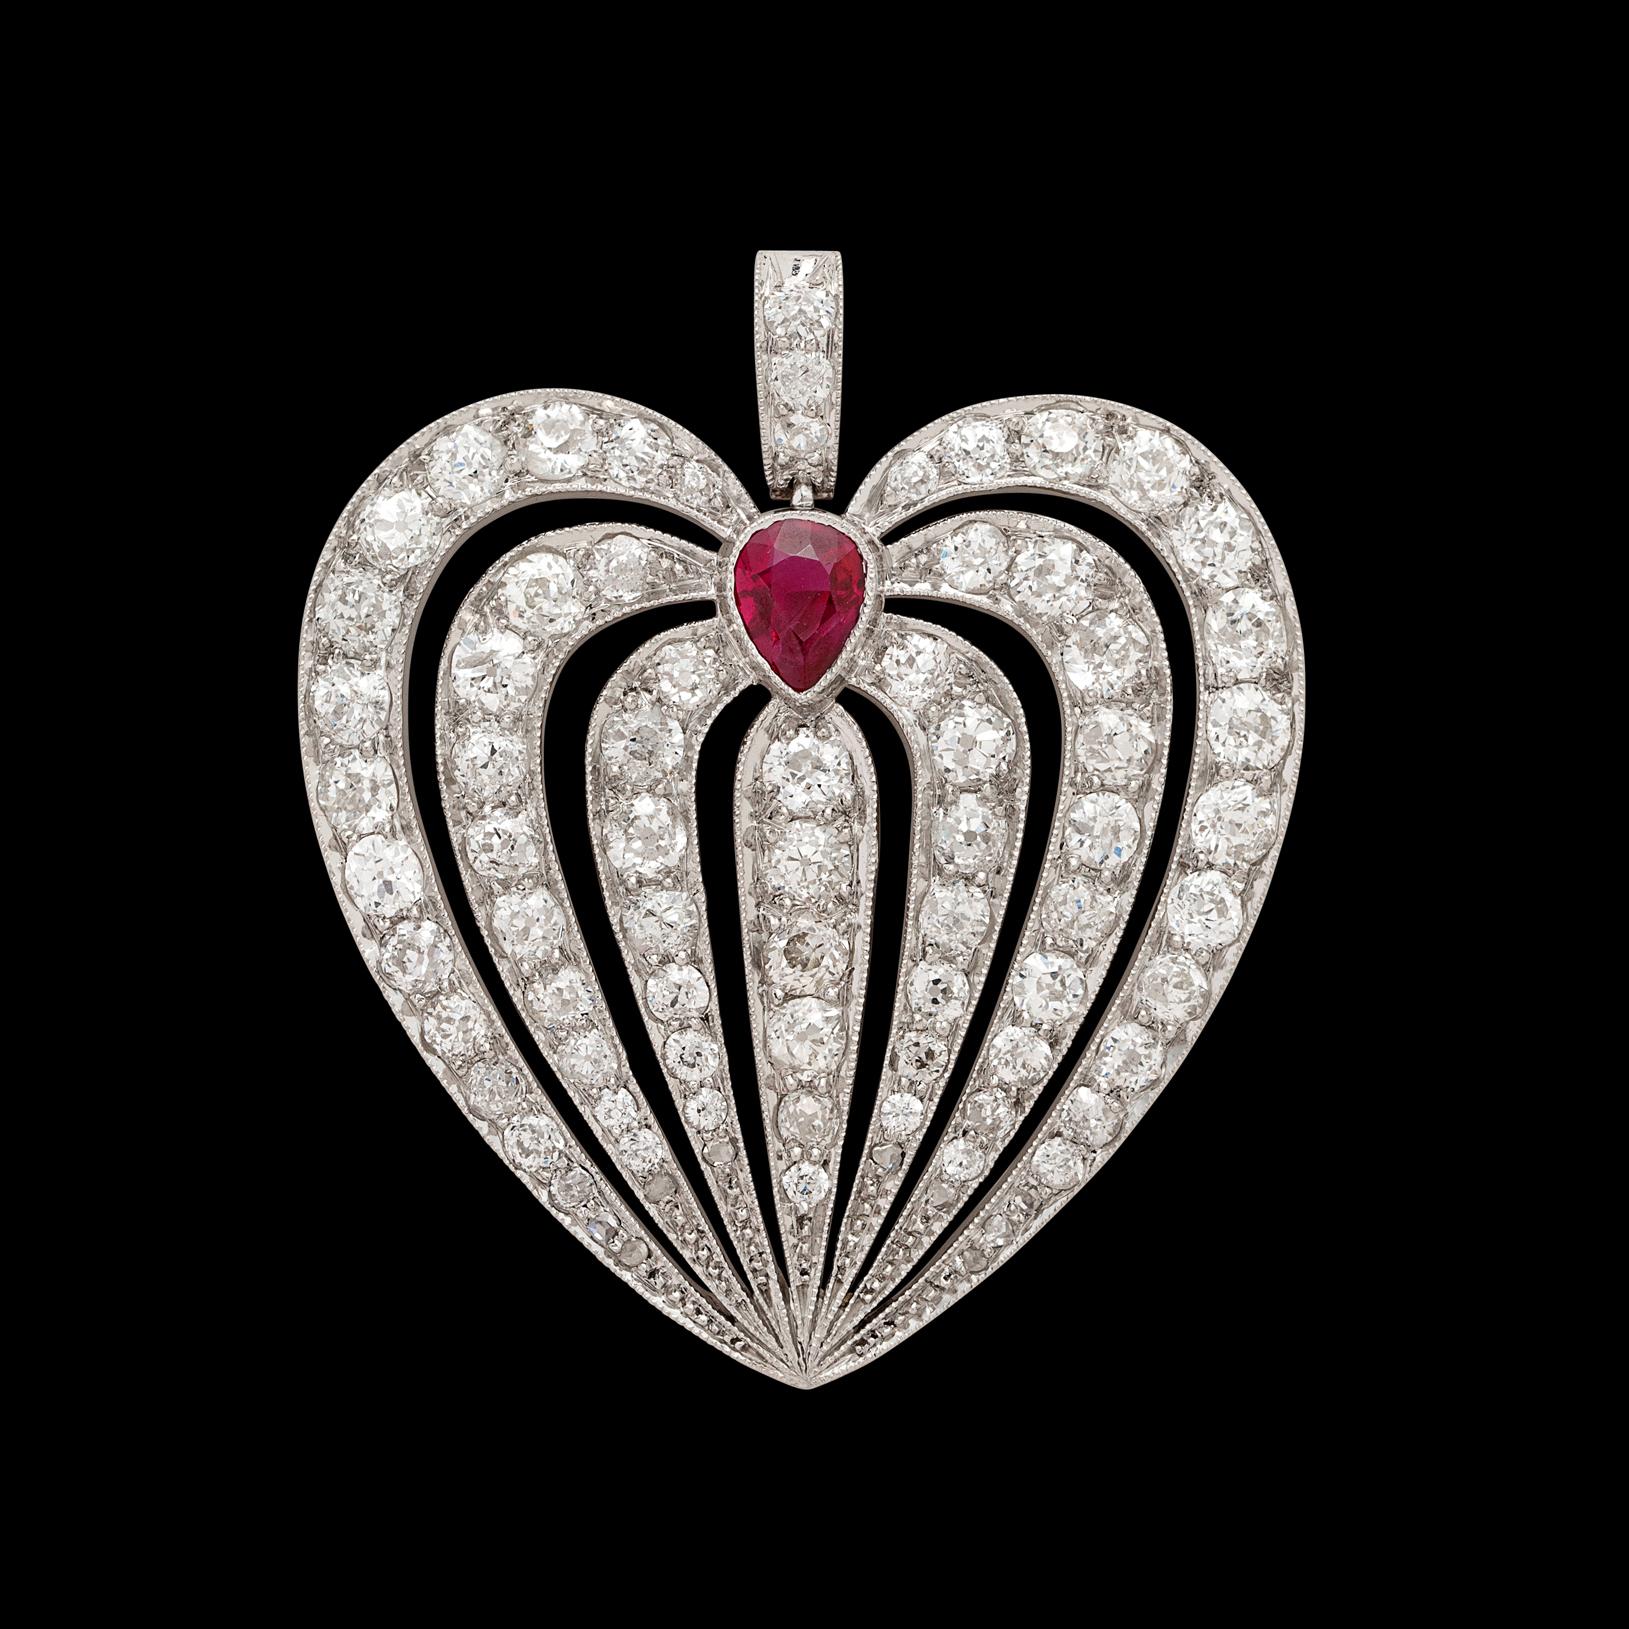 Featuring the type of craftsmanship one can only find in an era long gone by, this antique pendant features 79 Old Mine Cut Diamonds for a total weight of 4.75 carats, all surrounding one exceptional pigeon's blood red ruby. The pear shaped ruby,